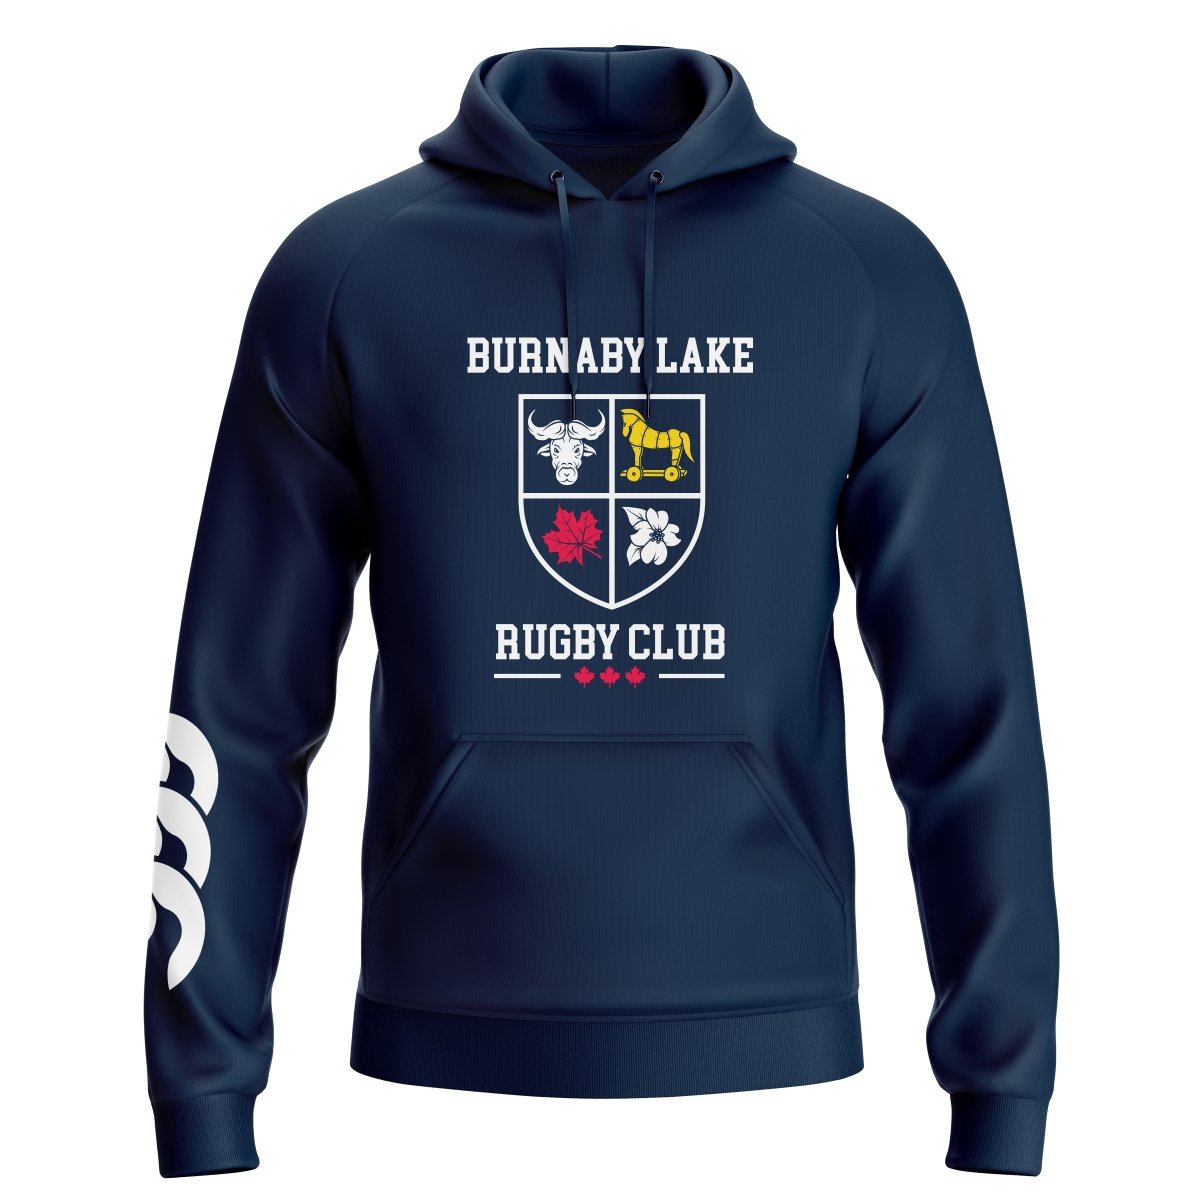 Burnaby Lake Shield CCC Club Hoodie - Adult Unisex - www.therugbyshop.com www.therugbyshop.com ADULT UNISEX / NAVY w/ Color Logo / XS TRS Distribution Canada HOODIES Burnaby Lake Shield CCC Club Hoodie - Adult Unisex